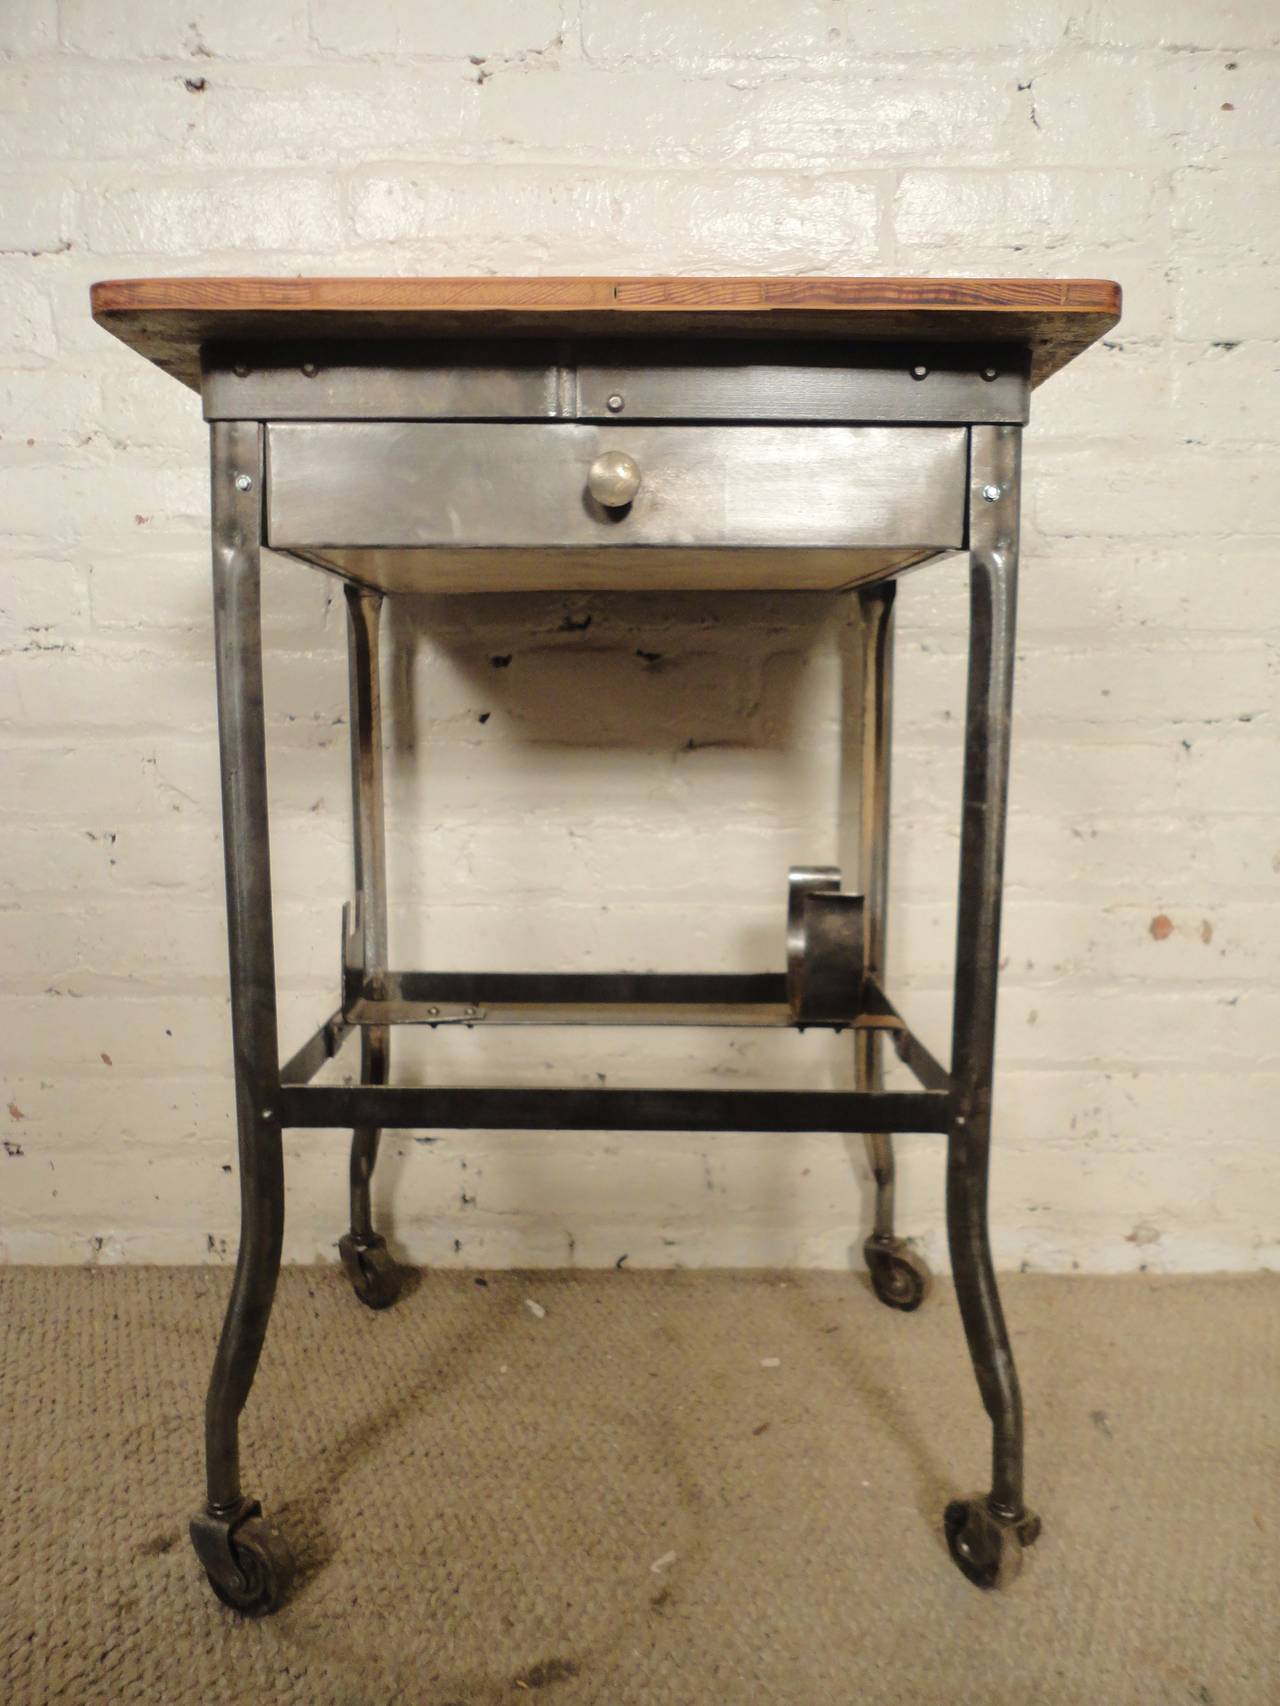 Freestanding American rolling examination room workstation with single sliding drawer, wood top and rolling casters. Used for medical purposes in the early to mid 20th Century, now refinished with a striking bare metal finish for modern use in home